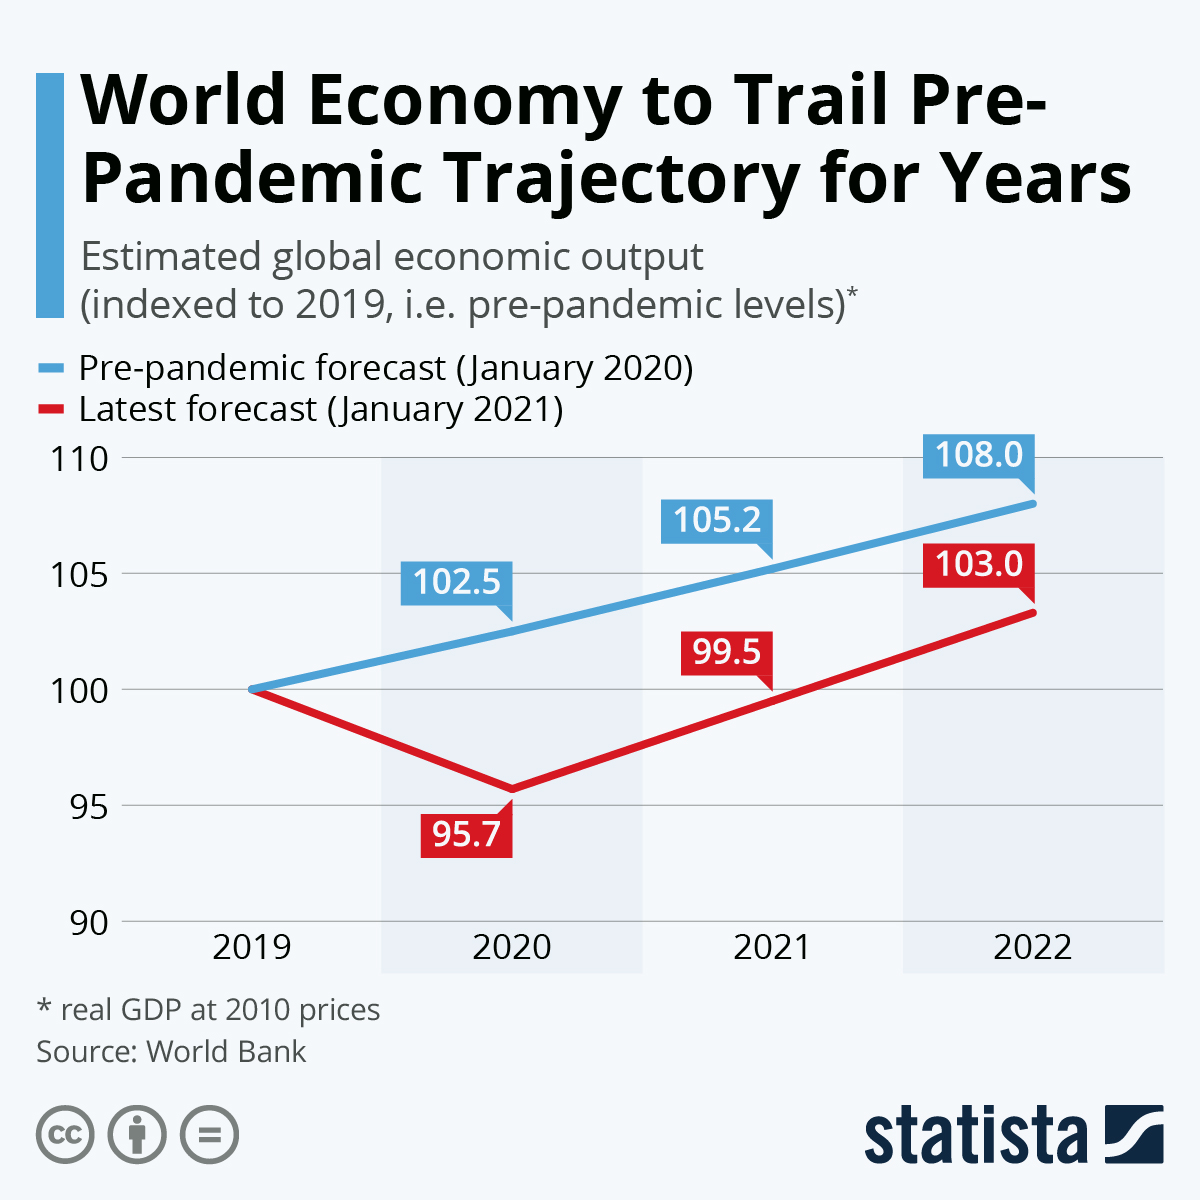 GDP To Trail PrePandemic Trajectory Until 2022